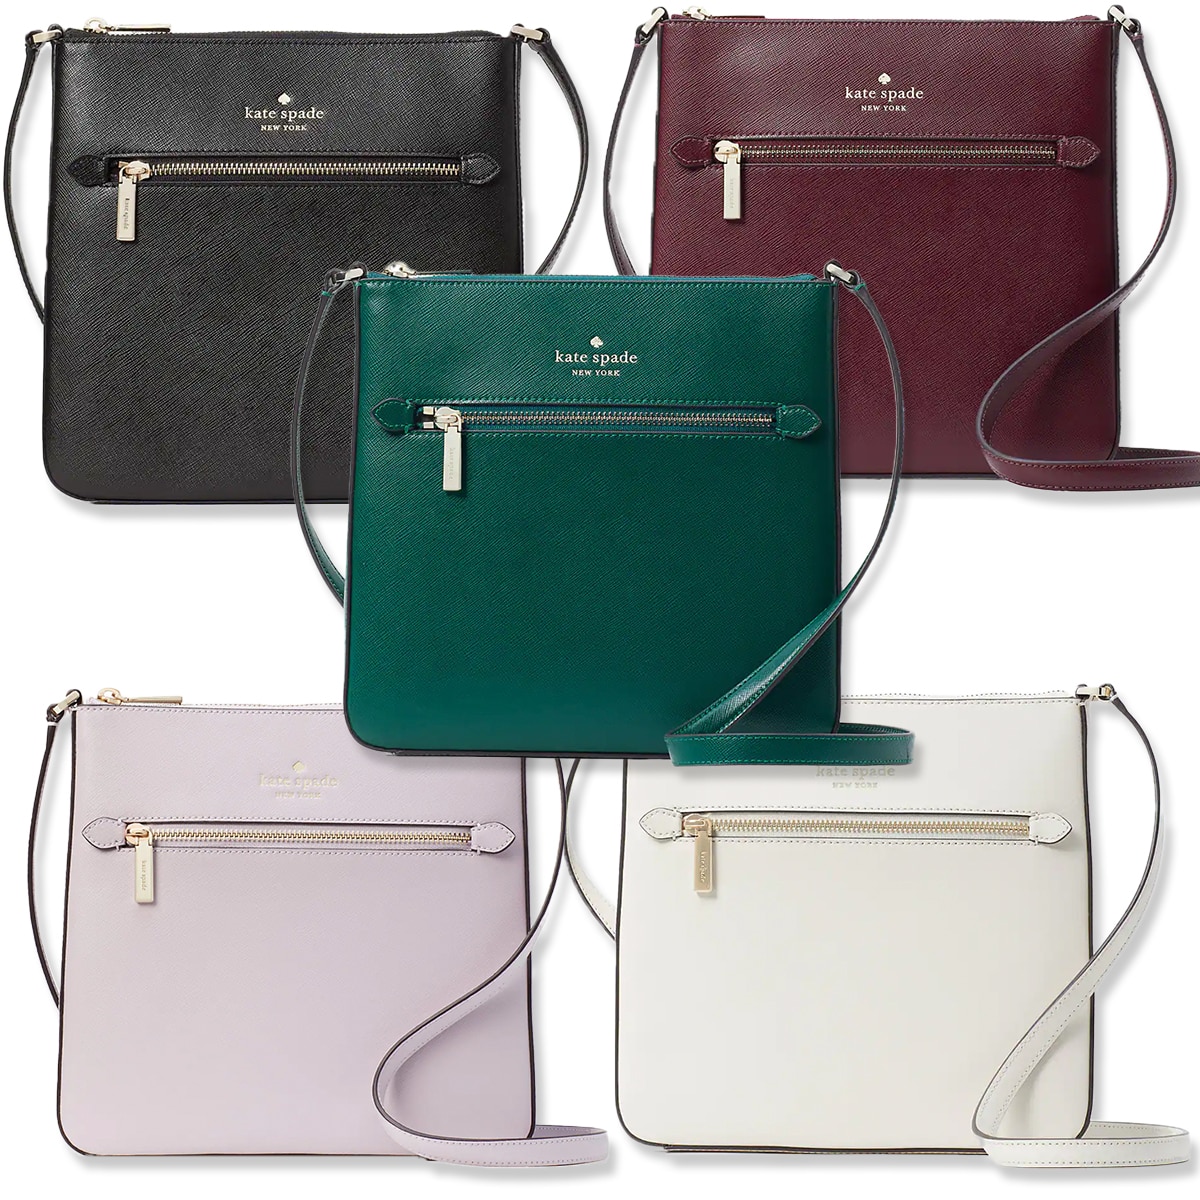 Kate Spade 24-Hour Flash Deal: Get a $300 Crossbody Bag for Just $69